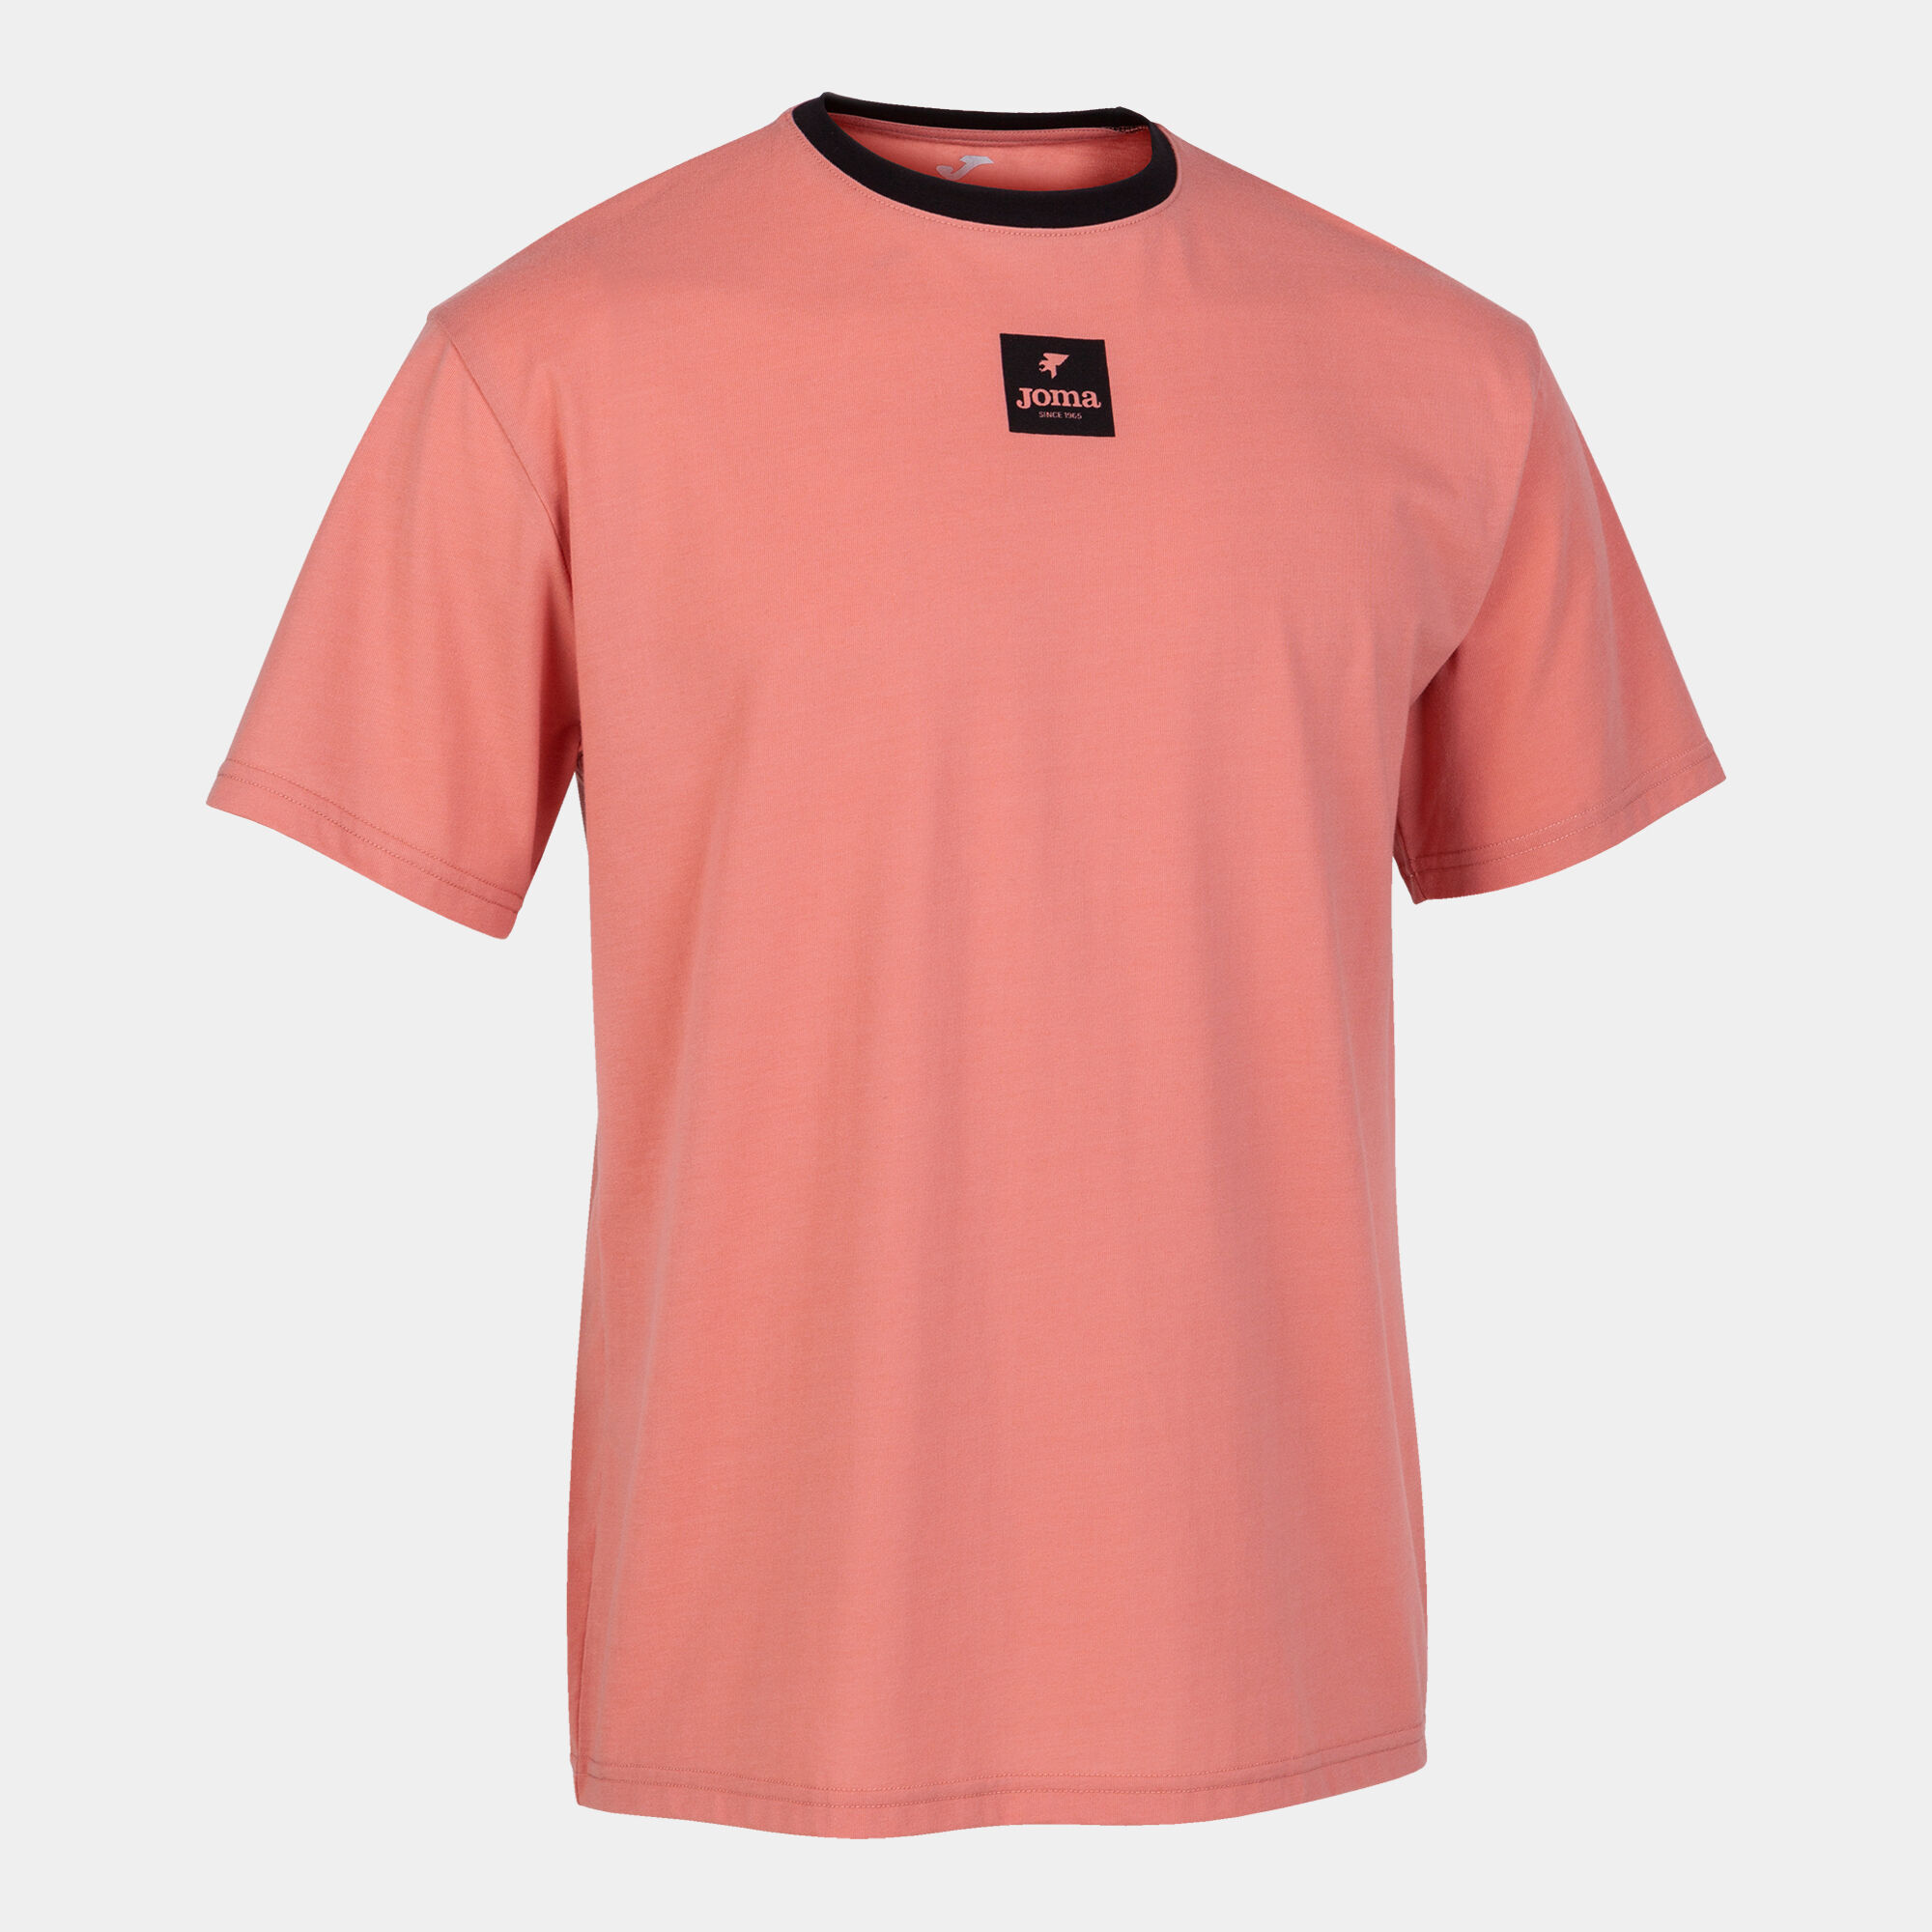 MAILLOT MANCHES COURTES HOMME CALIFORNIA ROSE